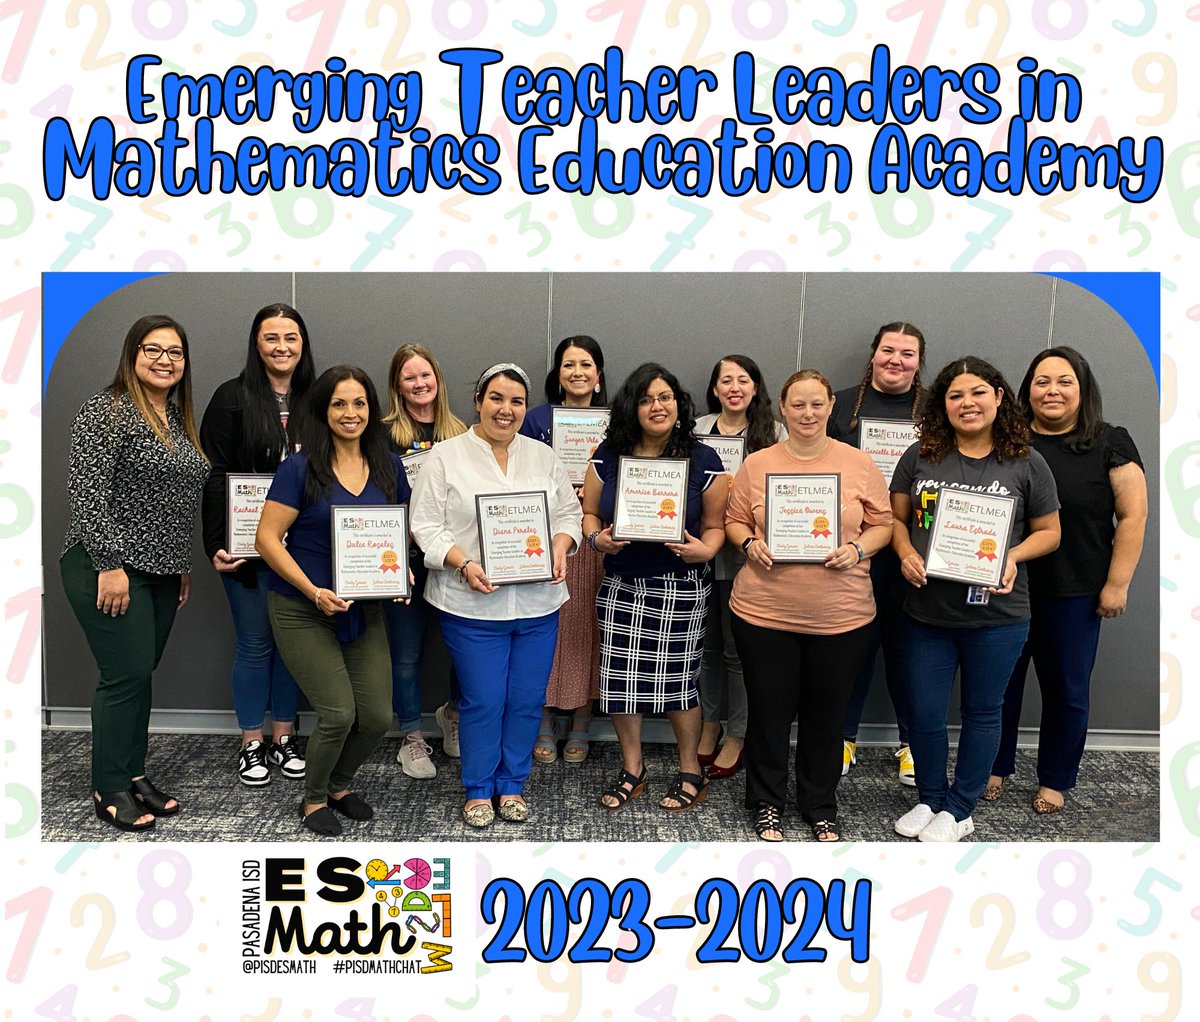 🥳🤓 Last night was our final meeting of our Emerging Teacher Leaders! They presented their final projects! There were a lot of lessons learned, new understandings, professional growth, and eye-opening experiences shared. Way to go #PISDETL members! #PISDMathChat